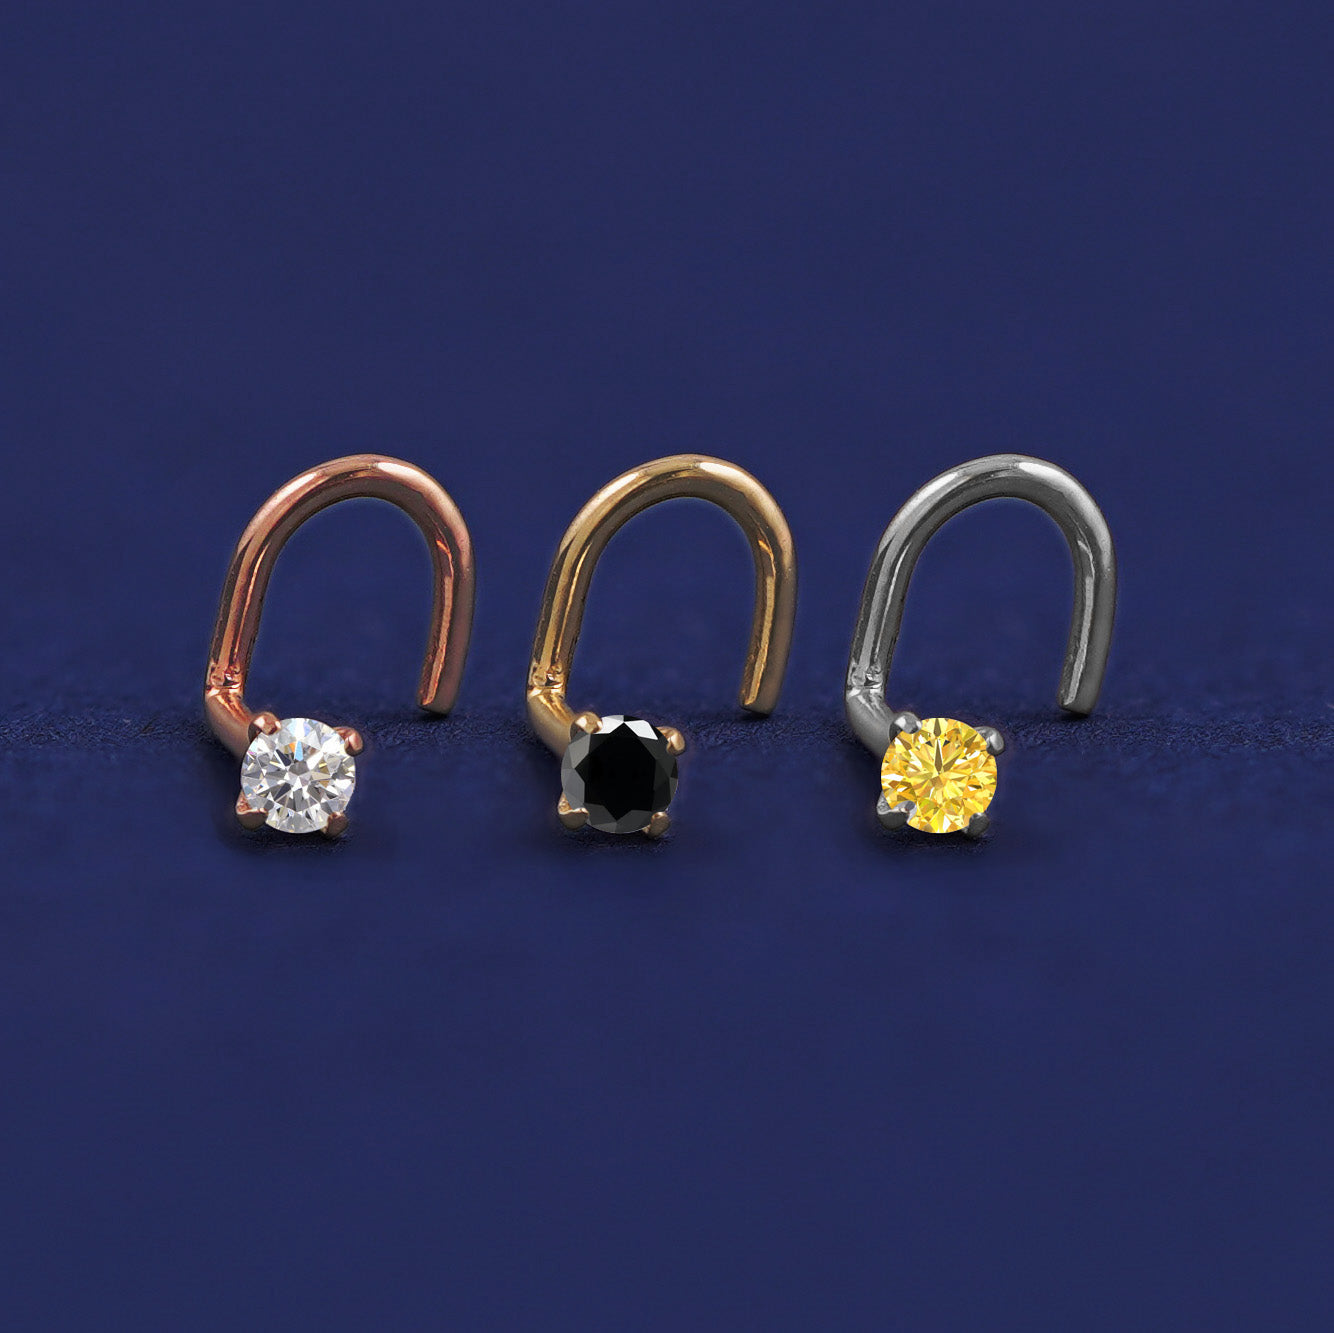 Three versions of the Diamond Nose Stud shown in options of rose, yellow, and white gold